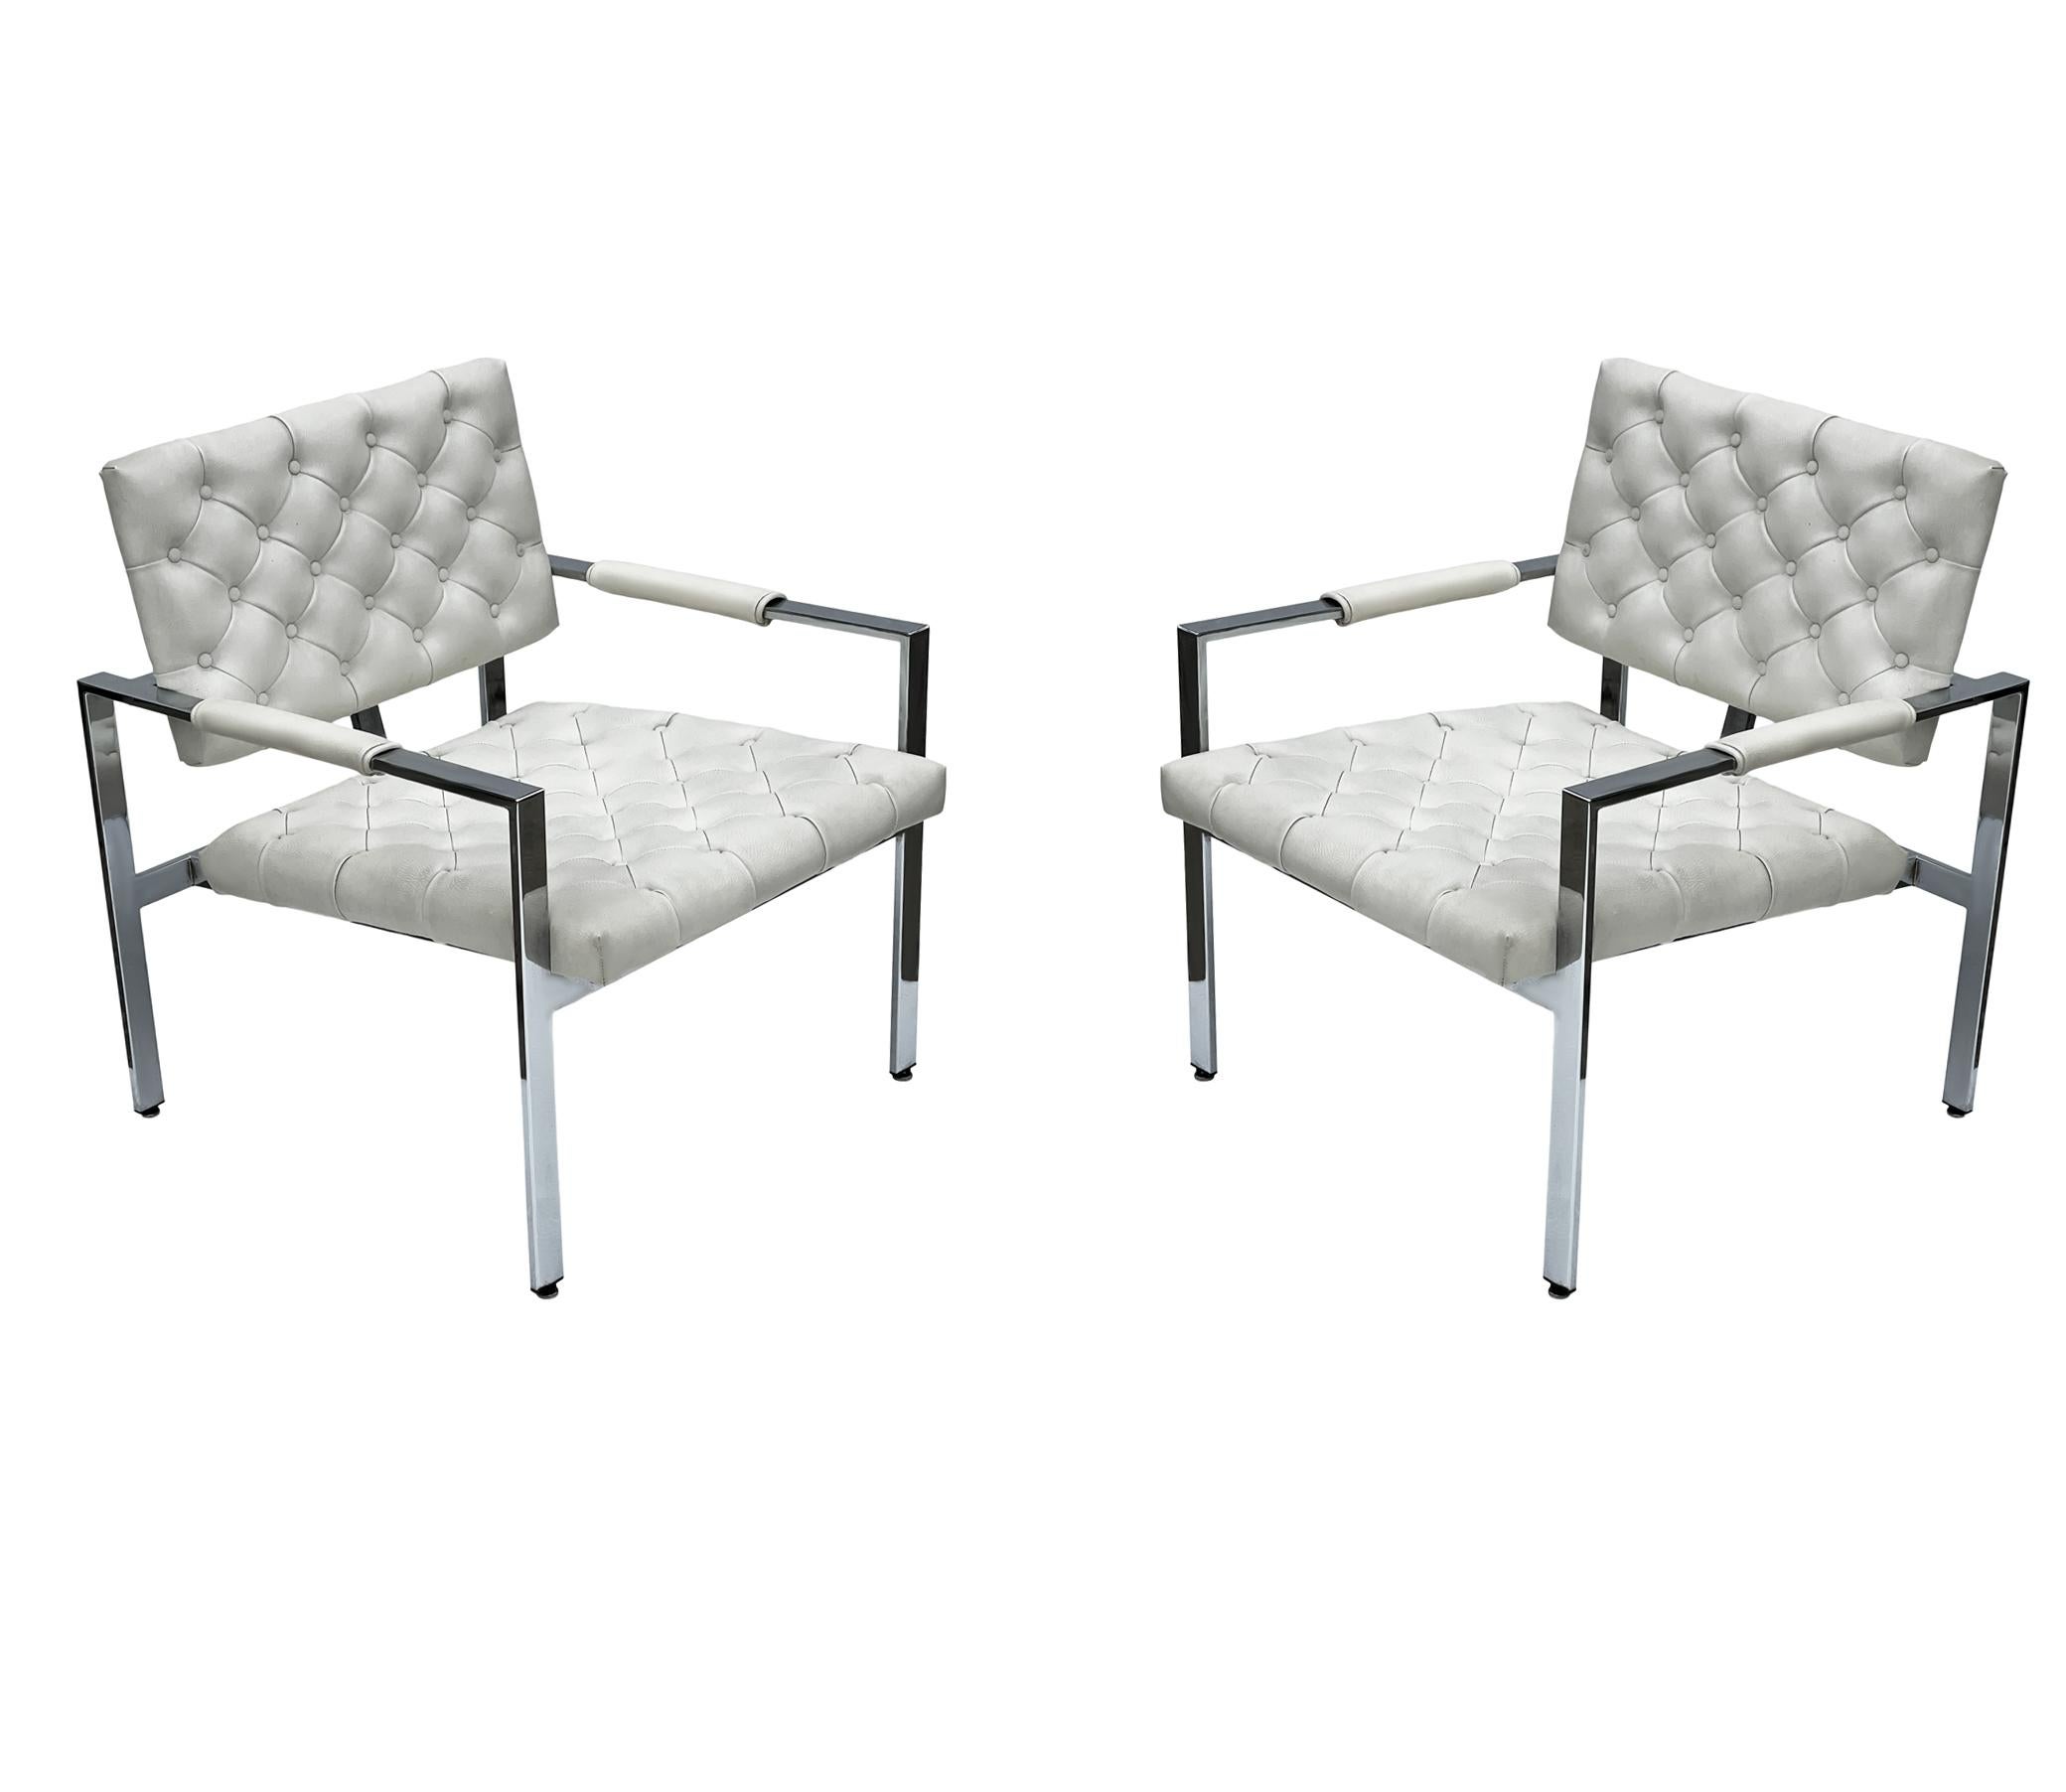 Pair Mid-Century Modern Chrome & White Tufted Lounge Chairs After Harvey Probber For Sale 2